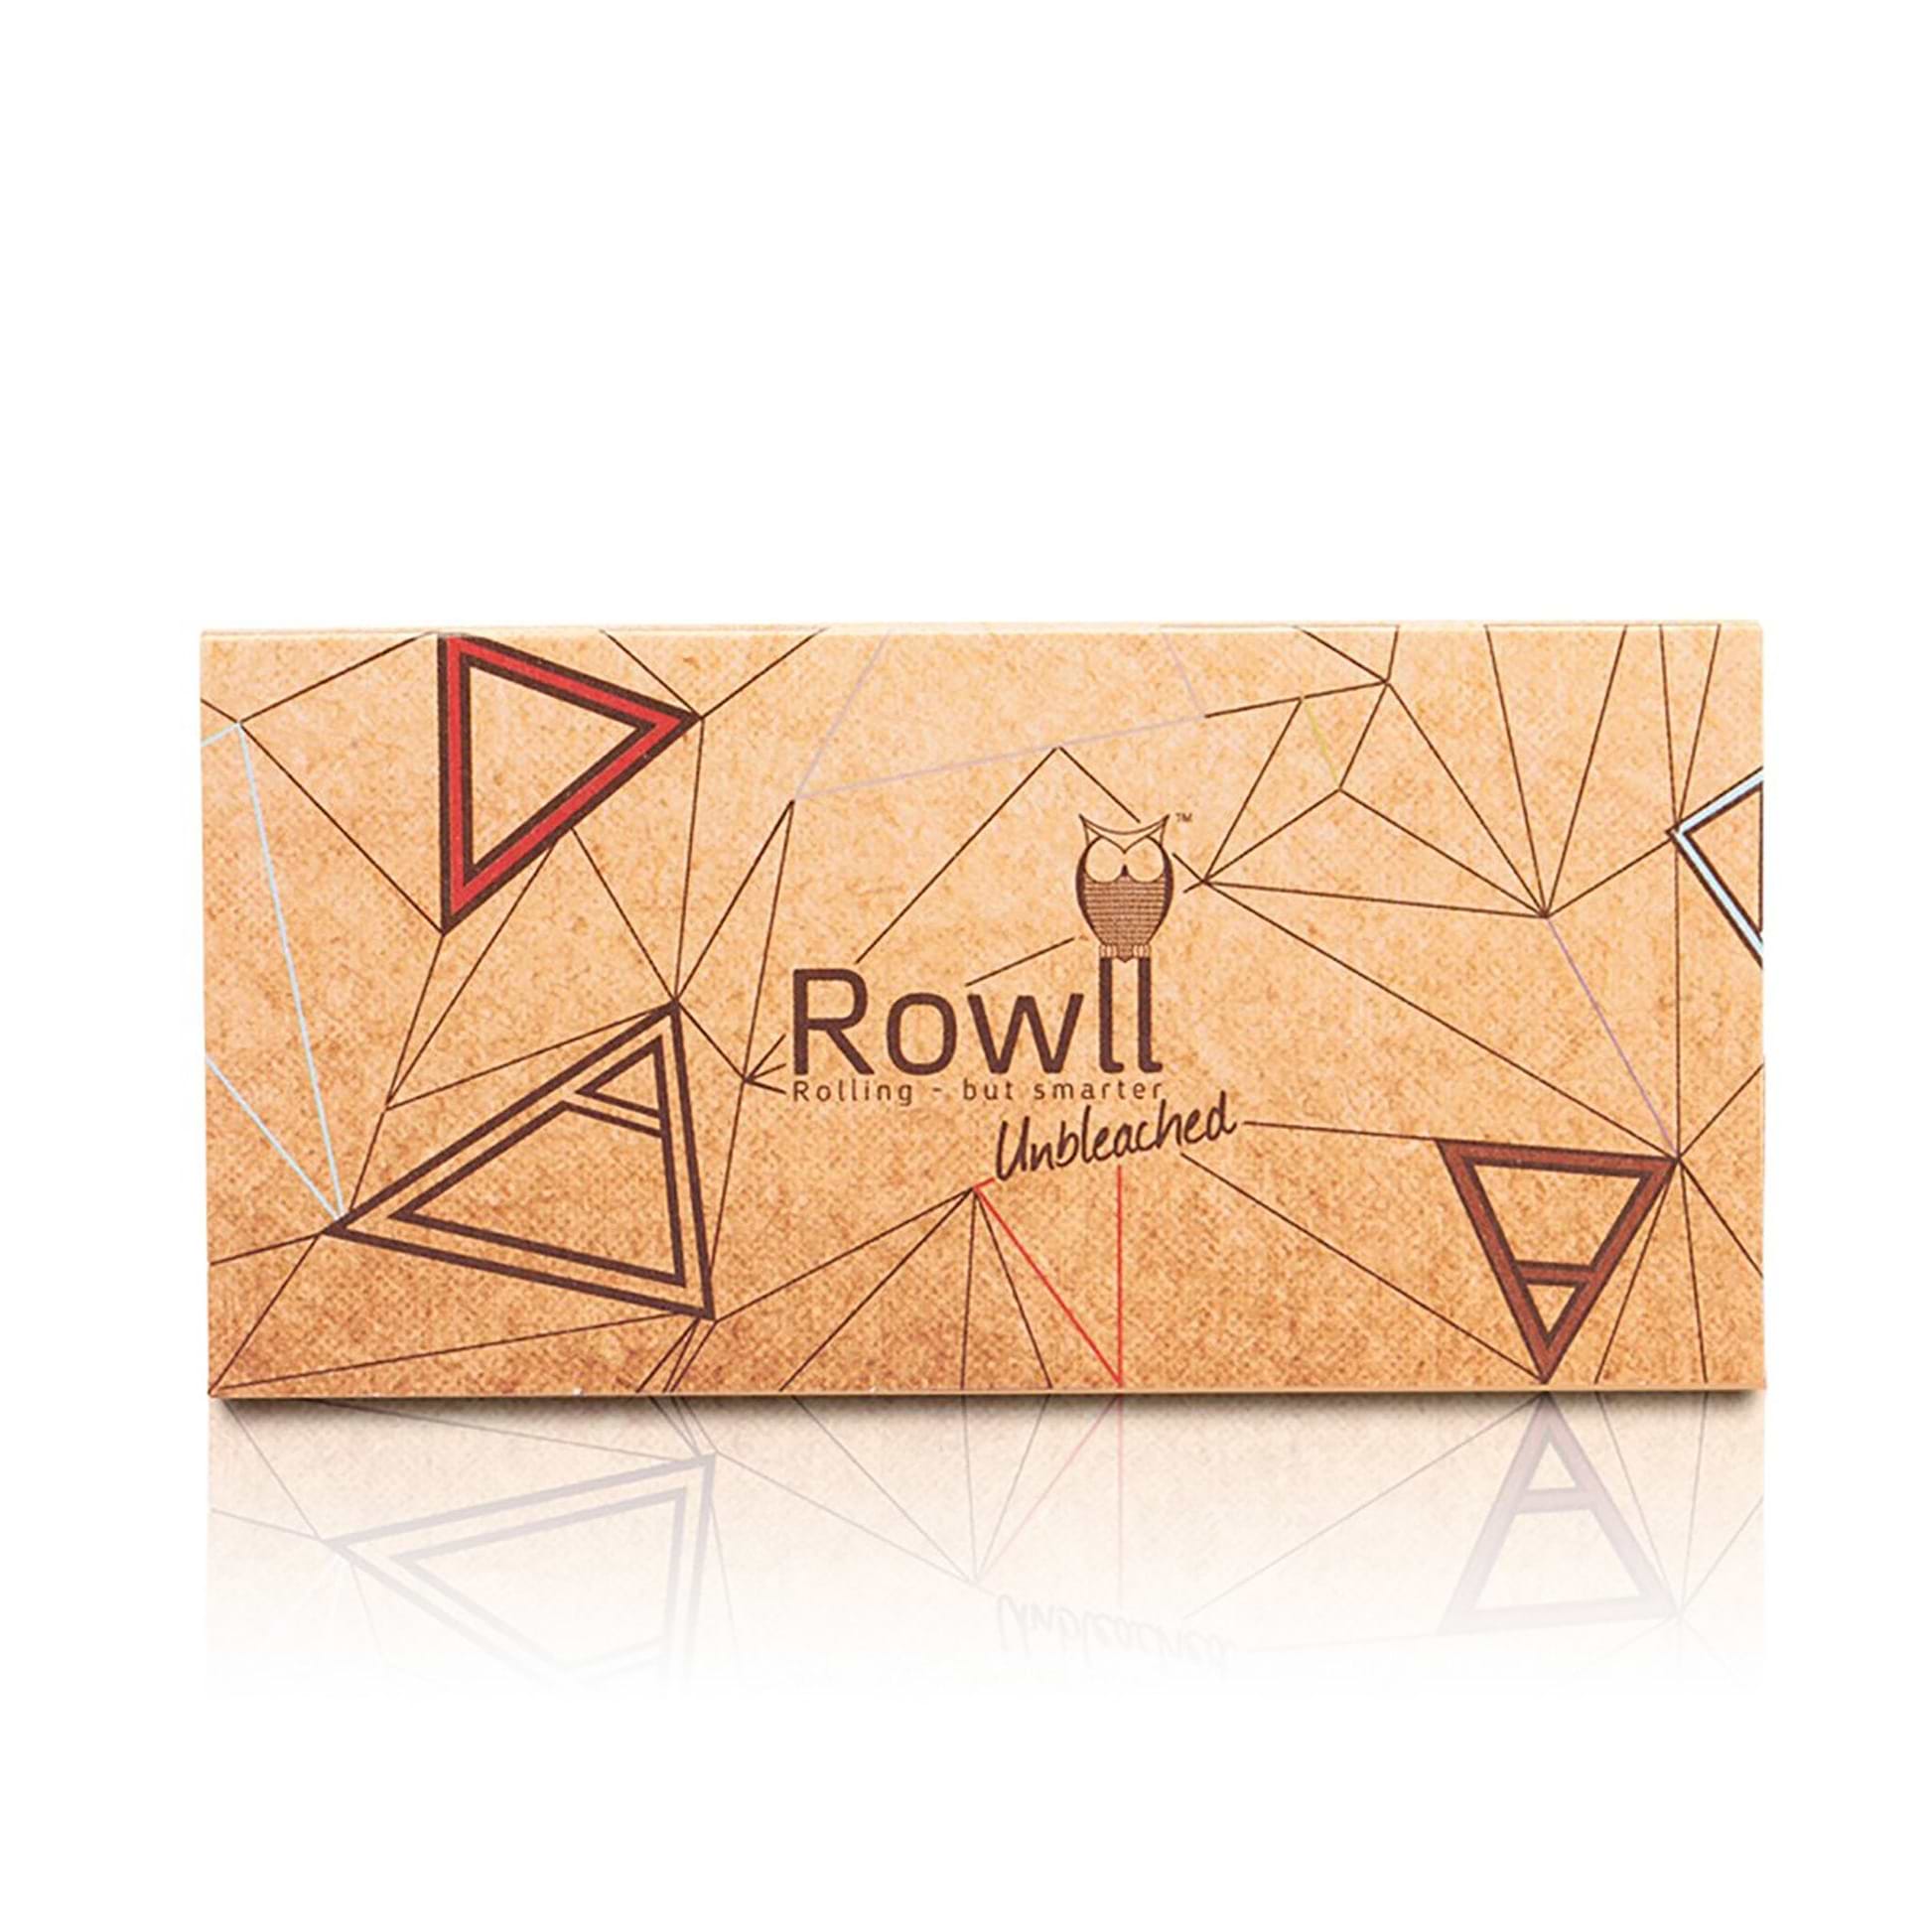 Rowll All in one Rolling Kit - 3 Pack Unbleached